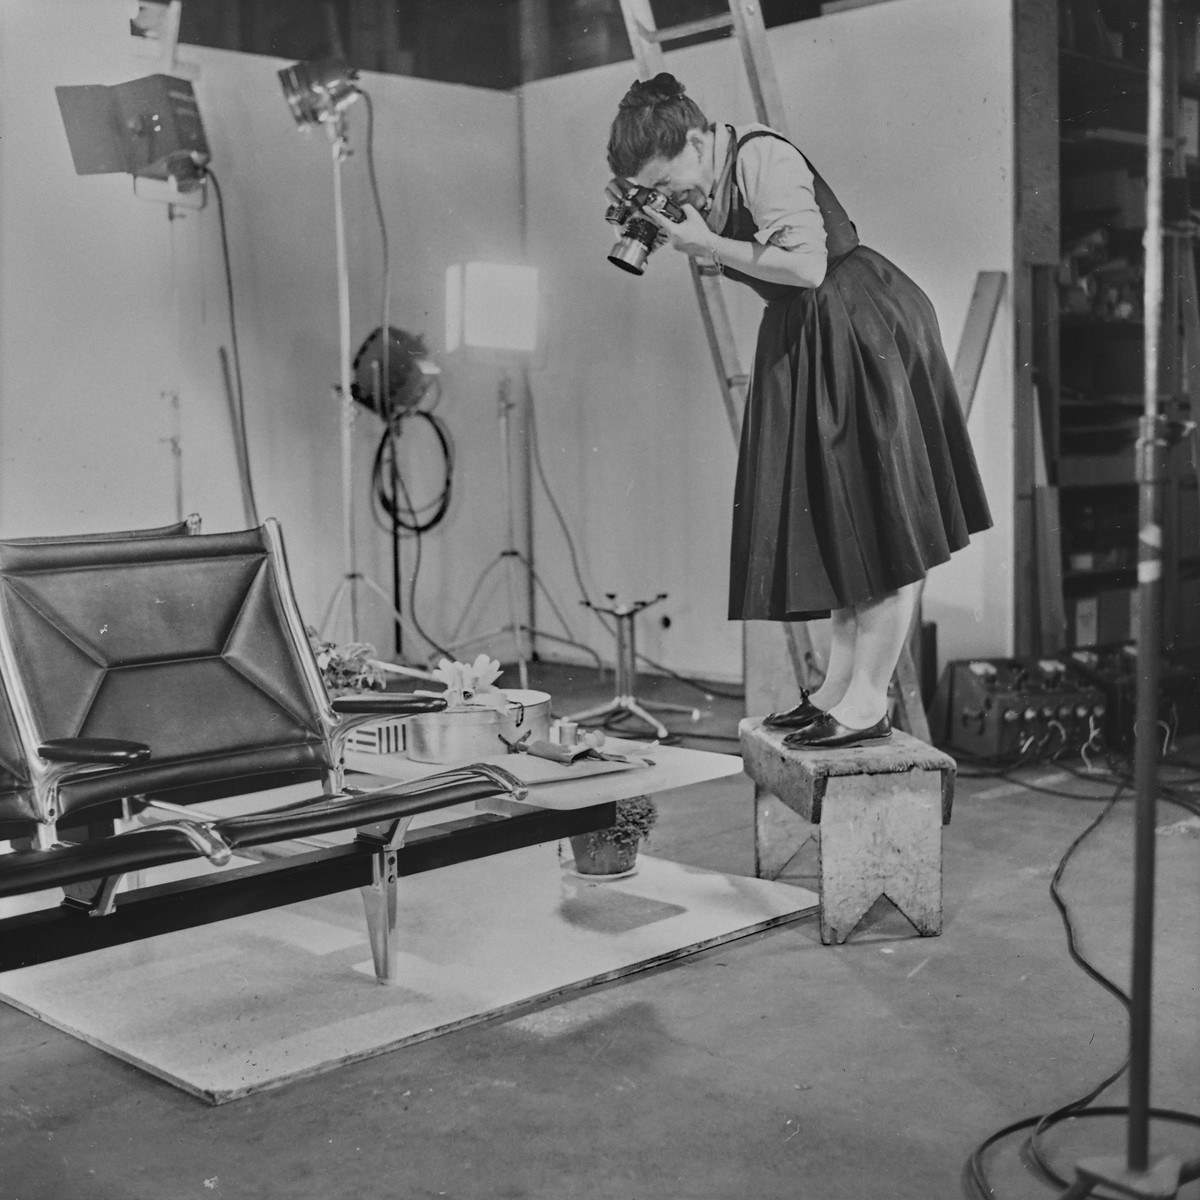 Ray Eames photographing the »Tandem Seating« at the Eames Studio, 23 October 1962, Eames Collection Vitra Design Museum © Eames Office LLC